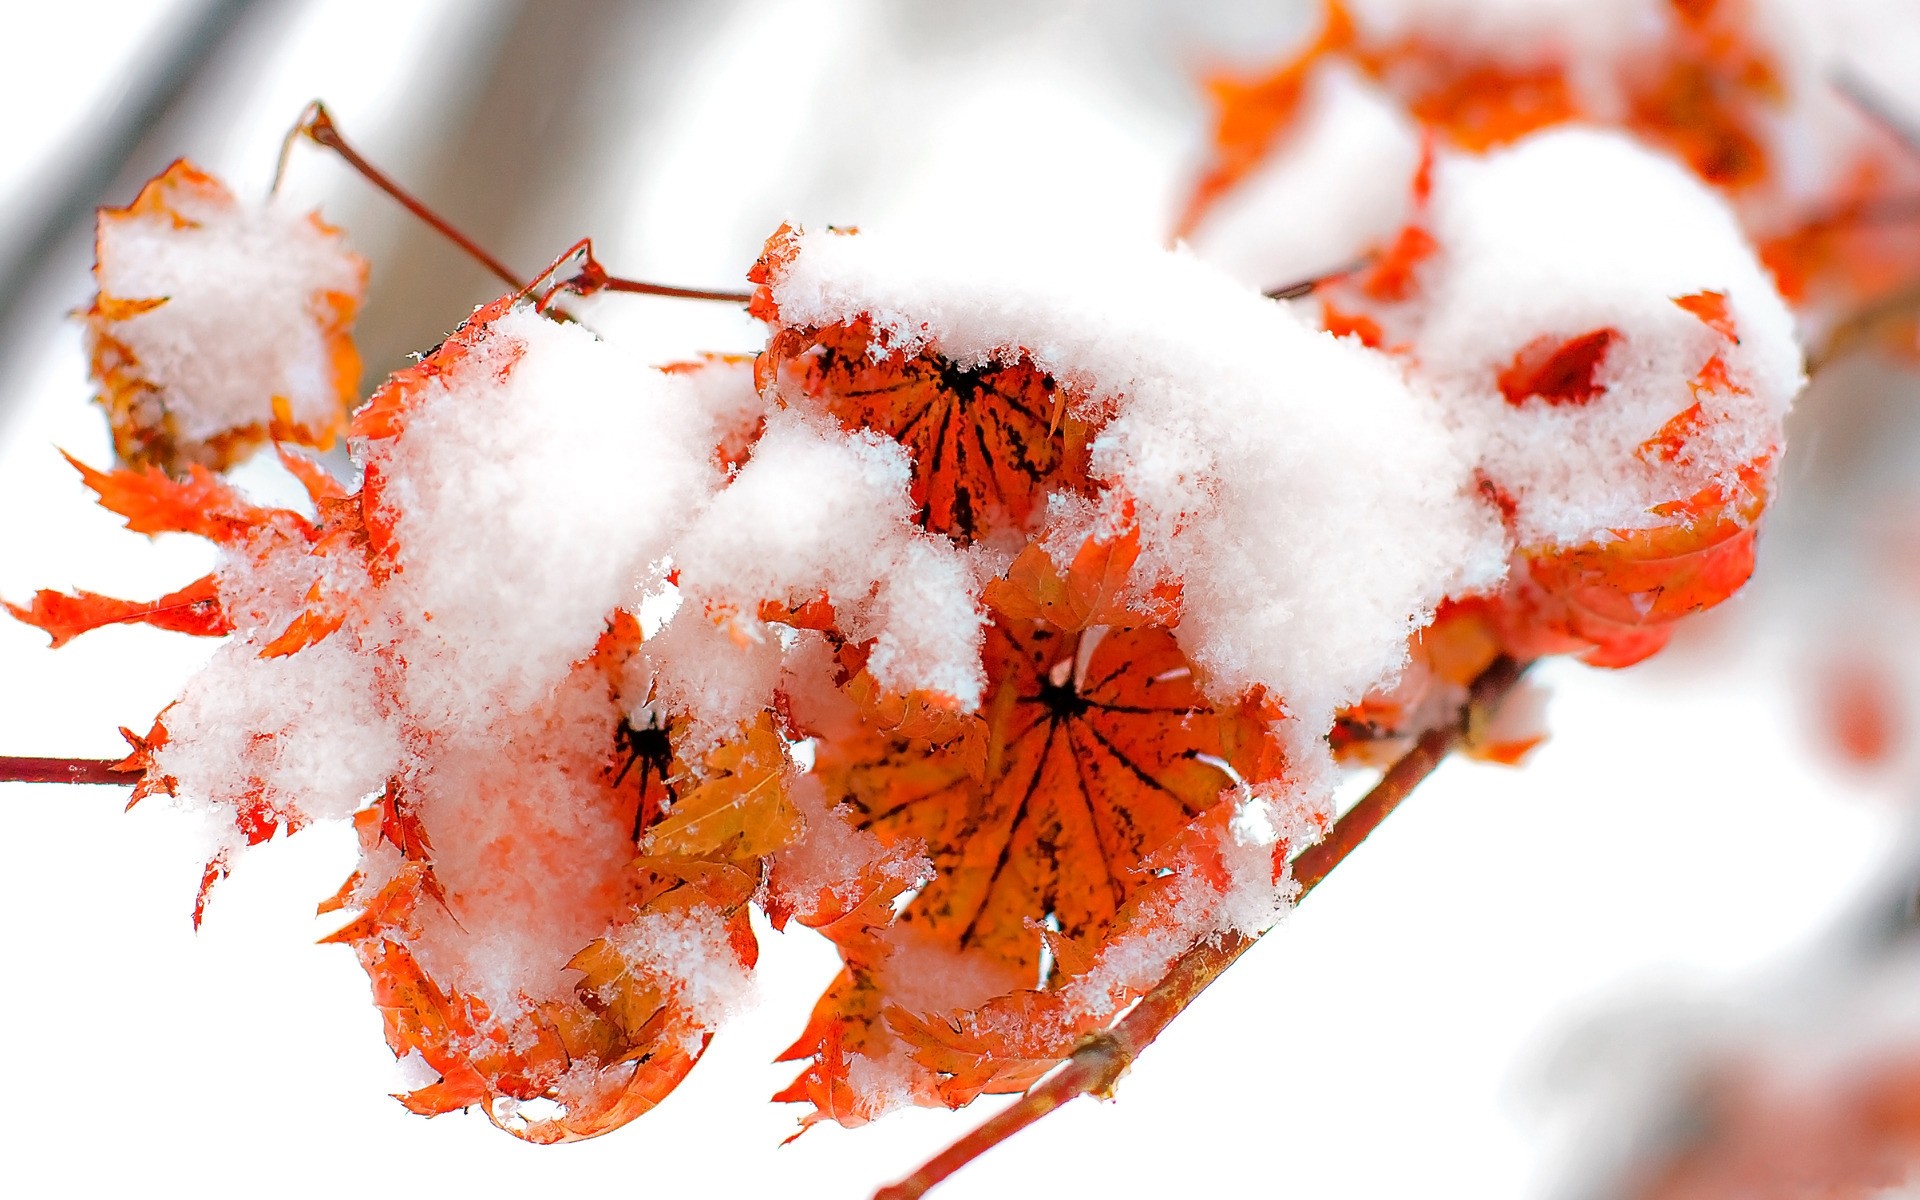 ice, Nature, Winter, Snow, Leaf, Autumn, Red, Orange, Leaves, Cold, Frozen Wallpaper